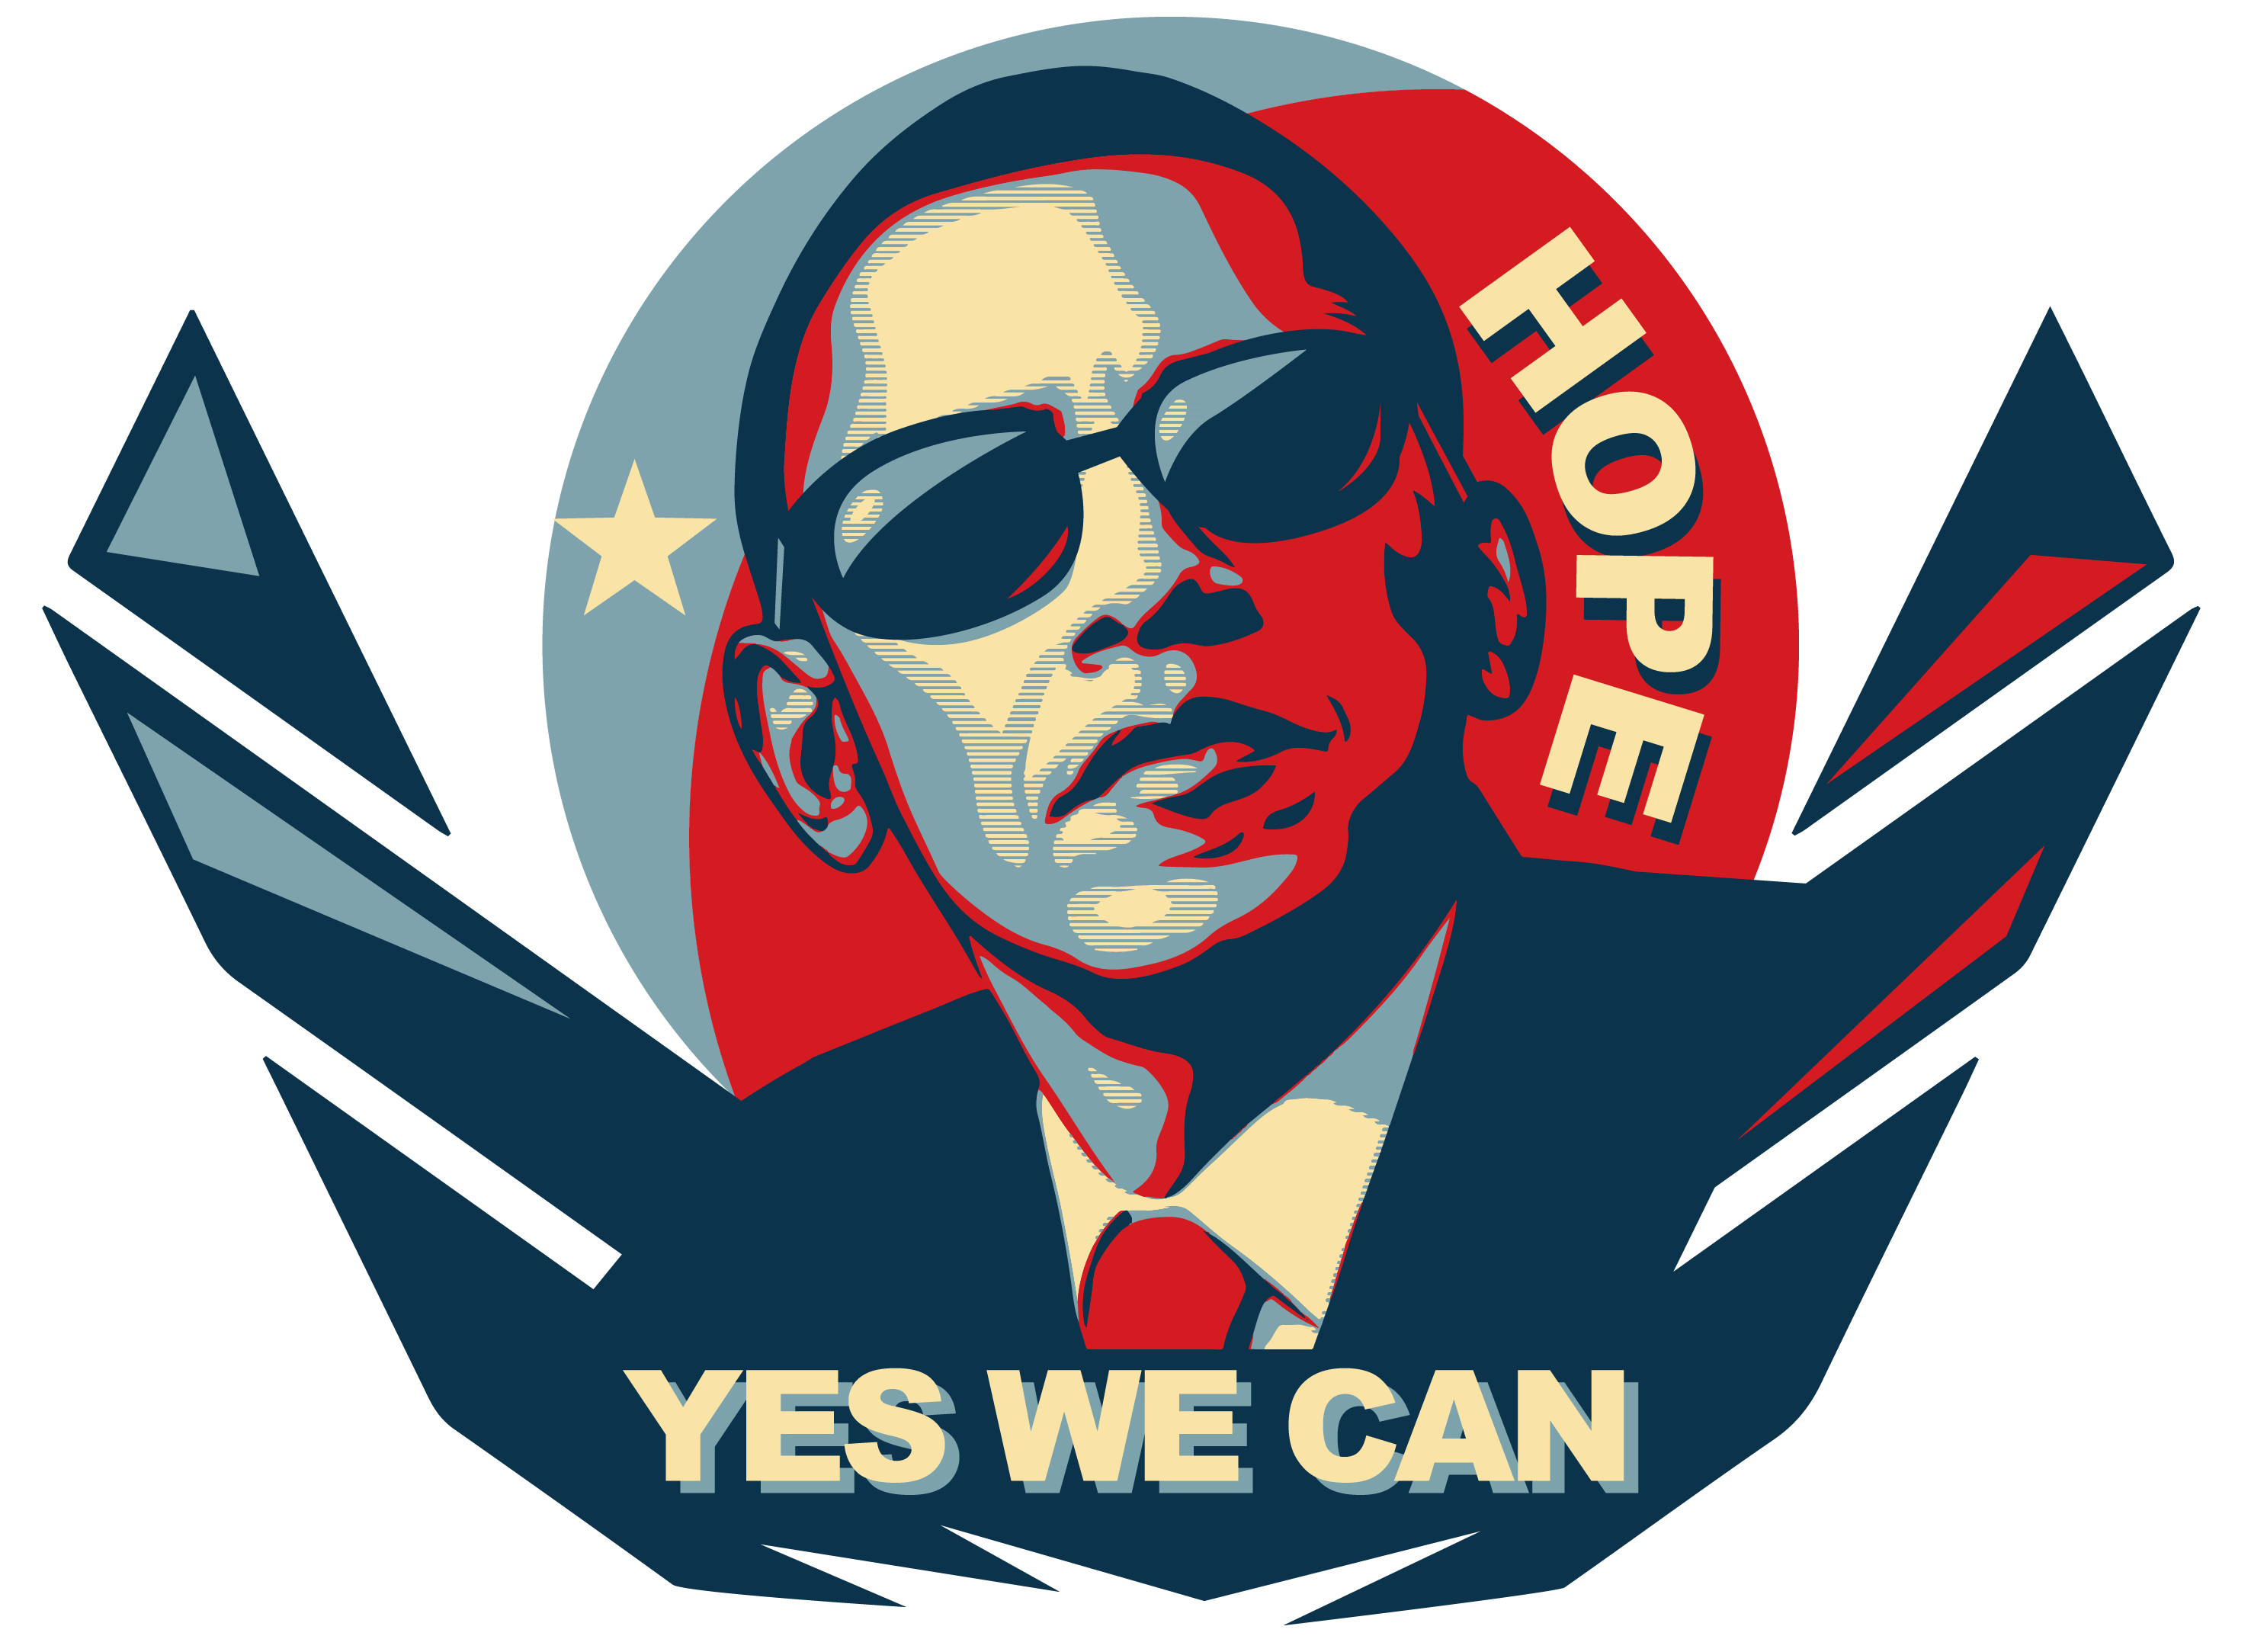 Yes we can t. Обама we can. Yes we can Obama. Барак Обама Yes we can. Yes we can плакат.